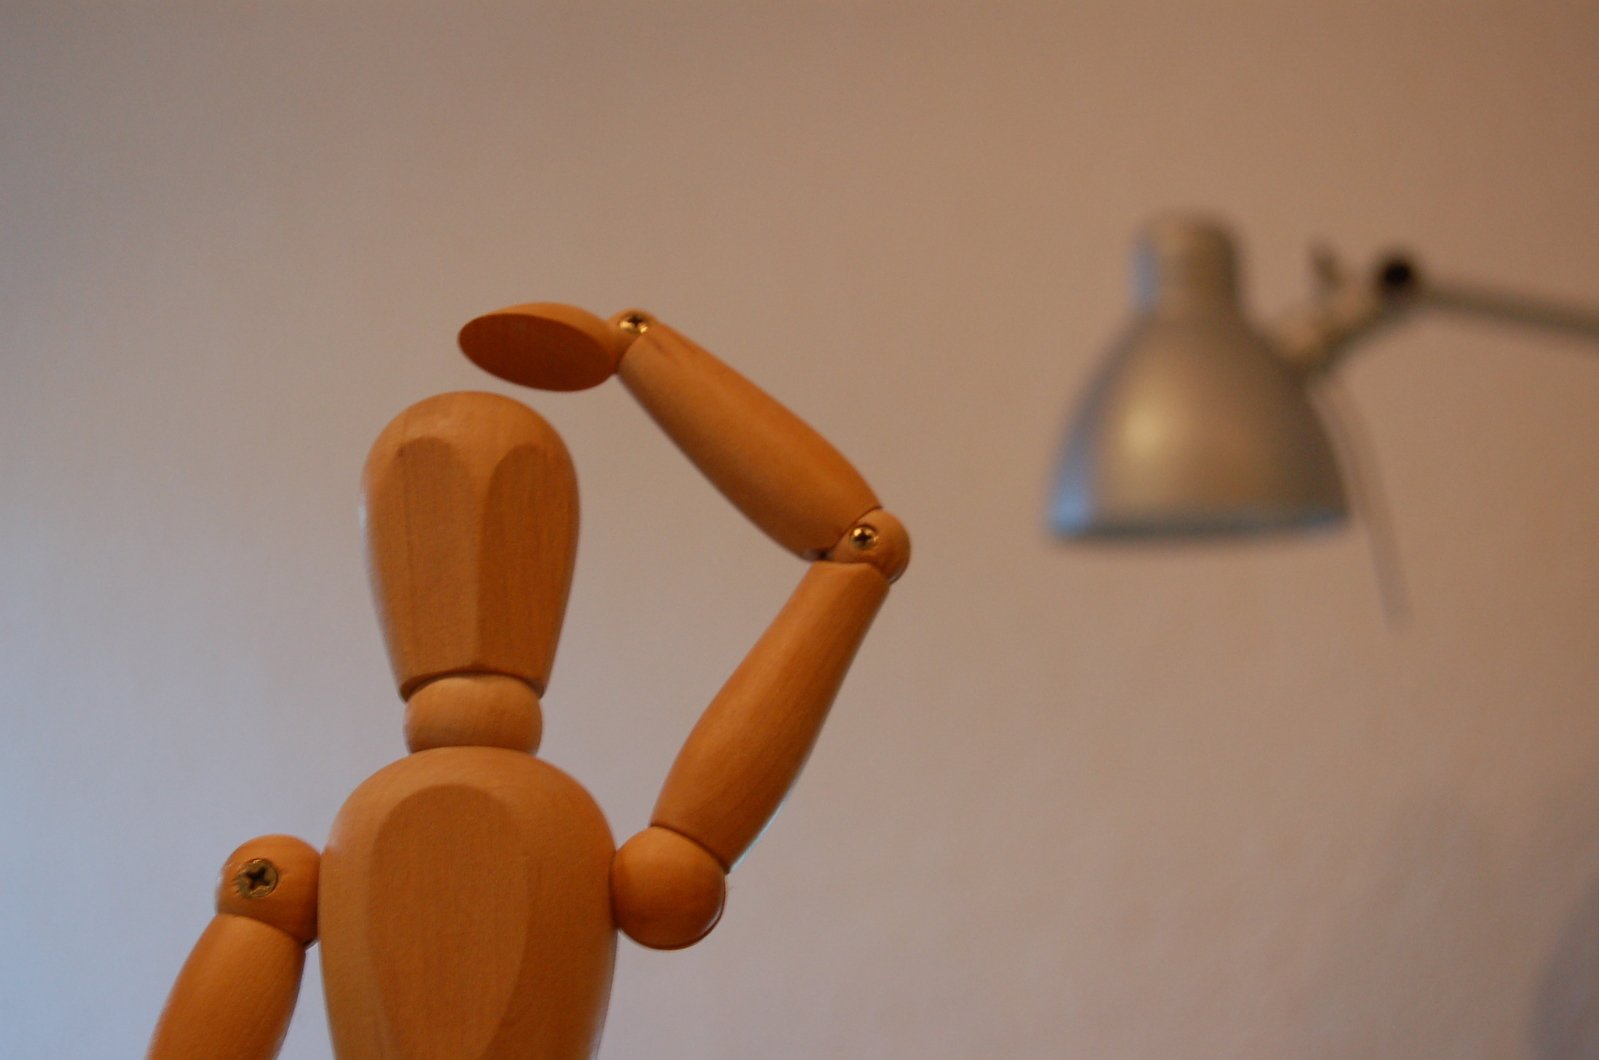 the wooden man has two arms up in an office setting